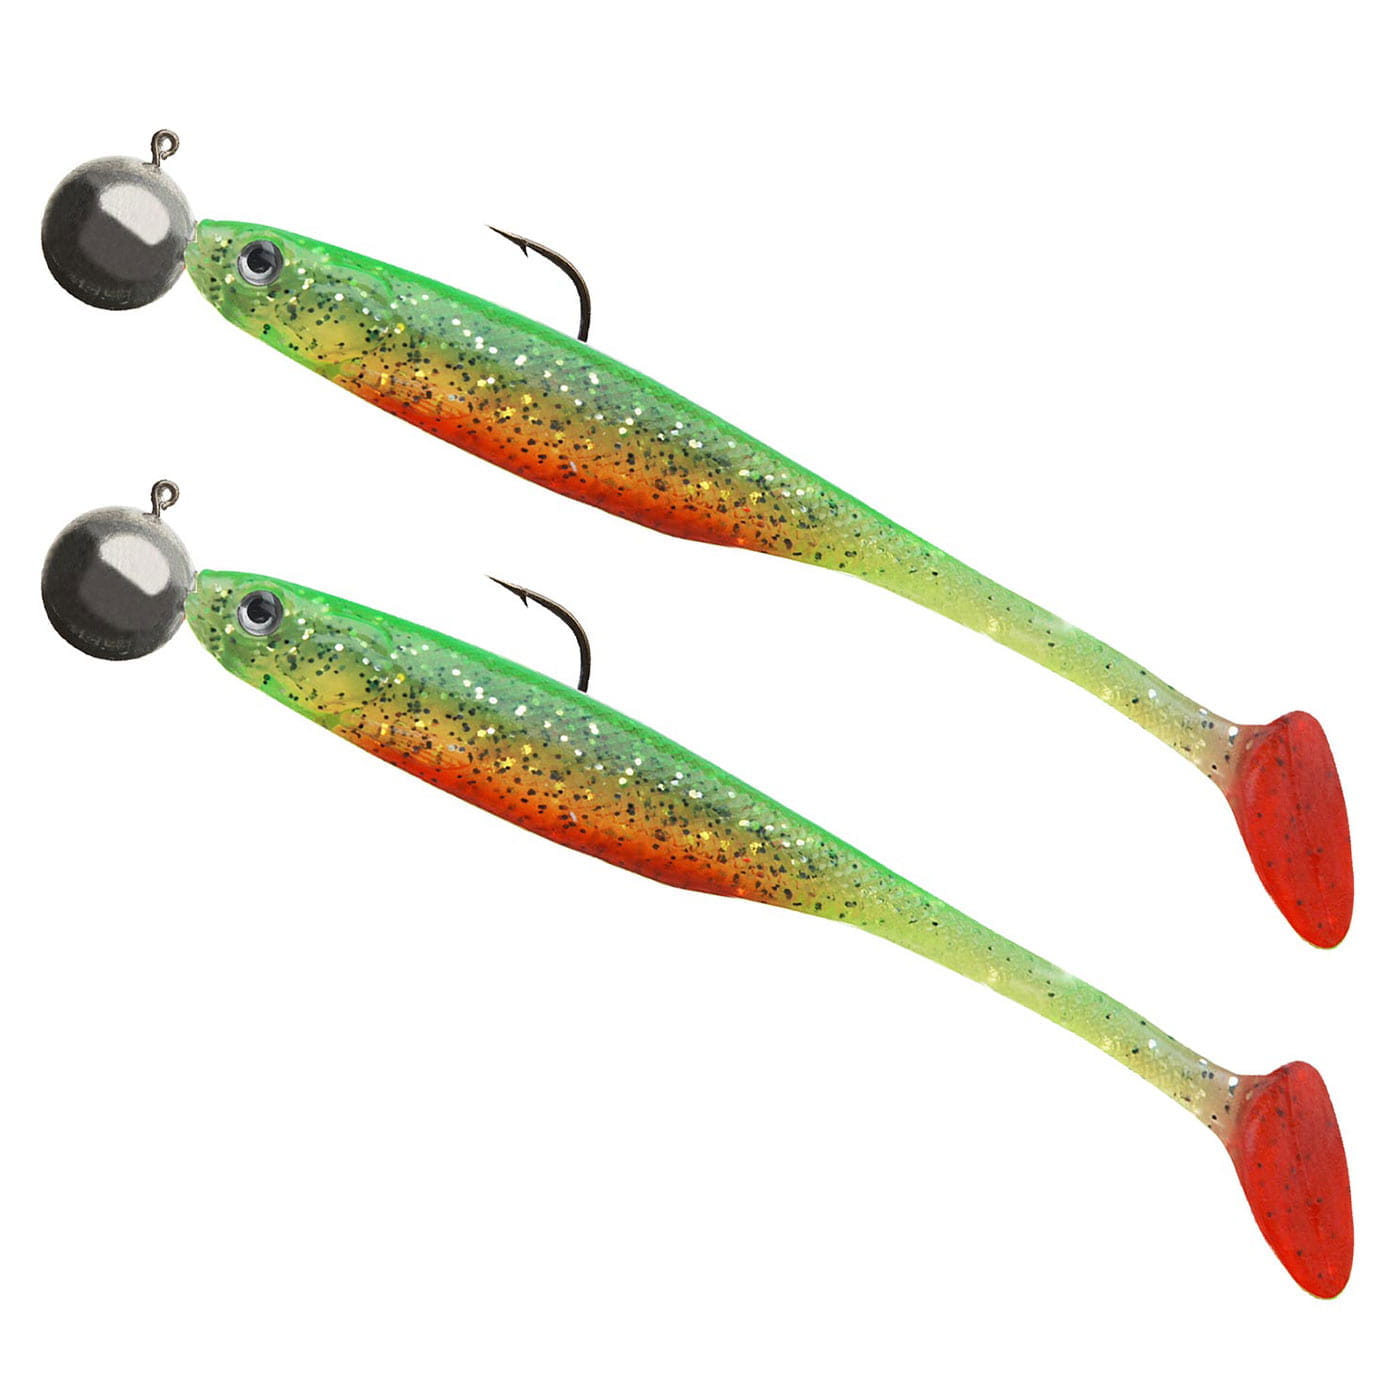 Cormoran Crazy Fin Shad GT 100mm 16g Ready to Fish